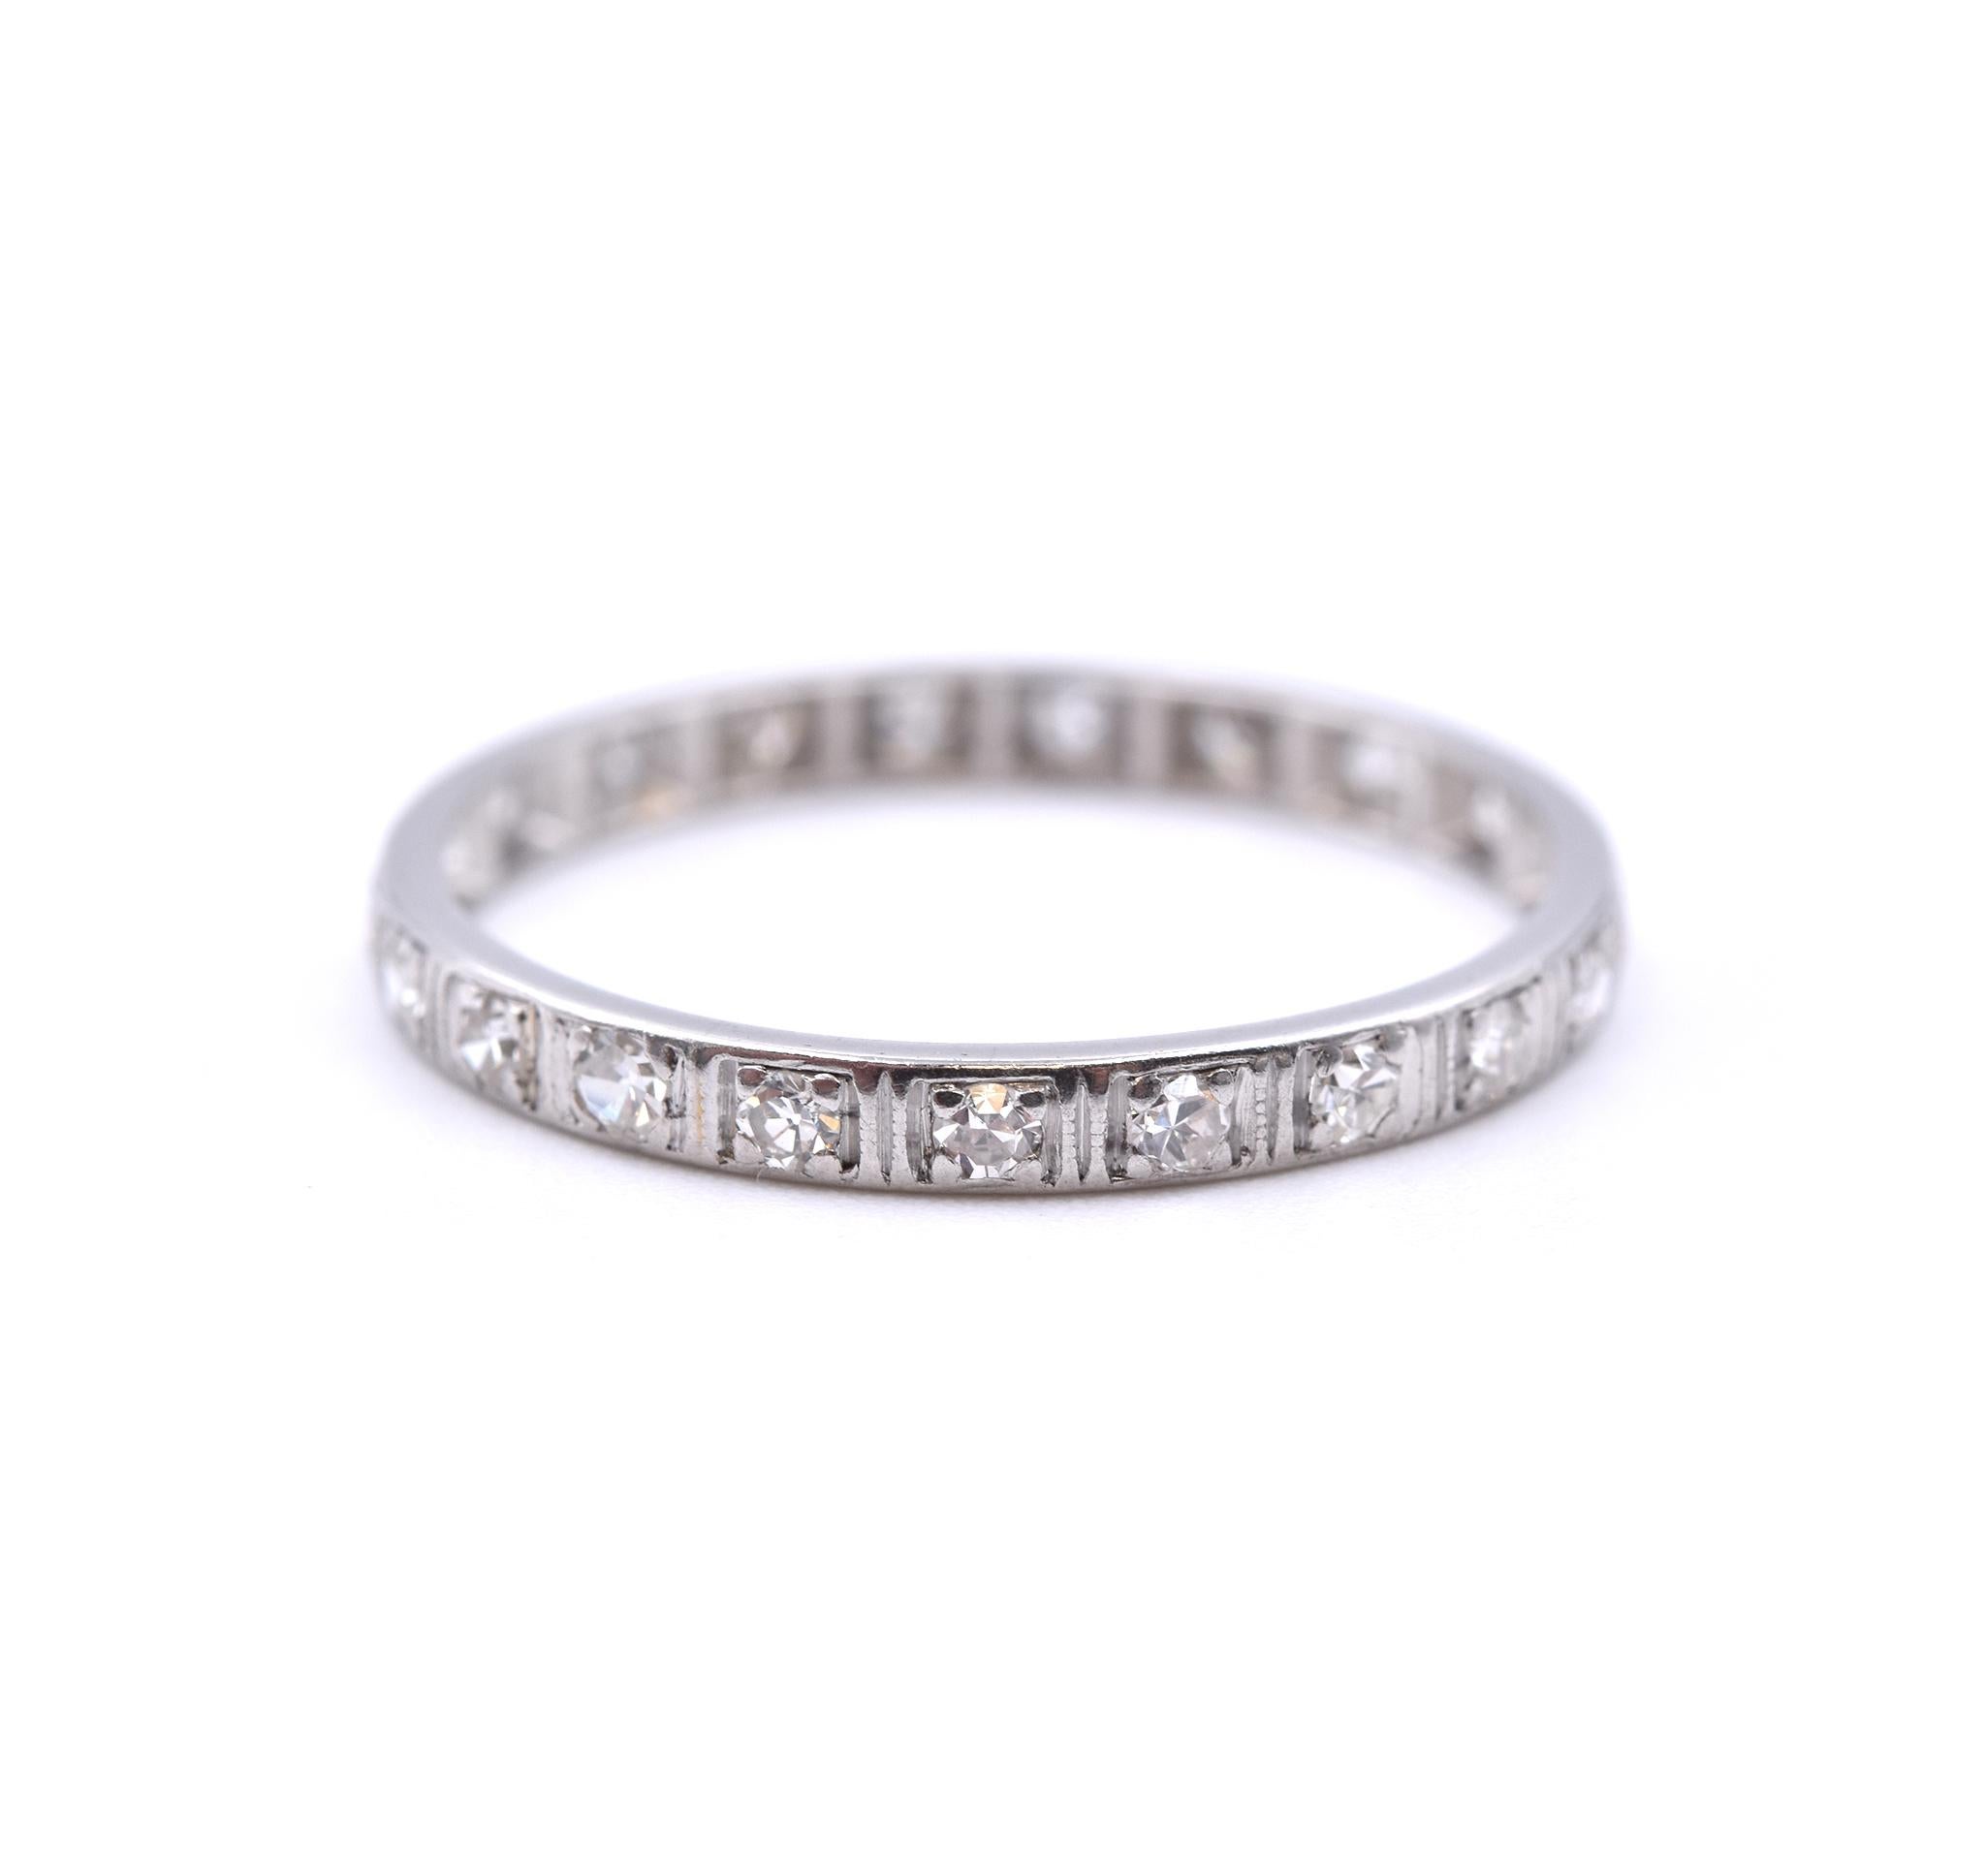 Designer: custom
Material: platinum
Diamonds: 21 round brilliant cut = .21cttw
Color: H
Clarity: SI1
Size: 7.5 (please allow two additional shipping days for sizing requests)  
Dimensions: ring measures 2.25mm in width
Weight: 1.76 grams
